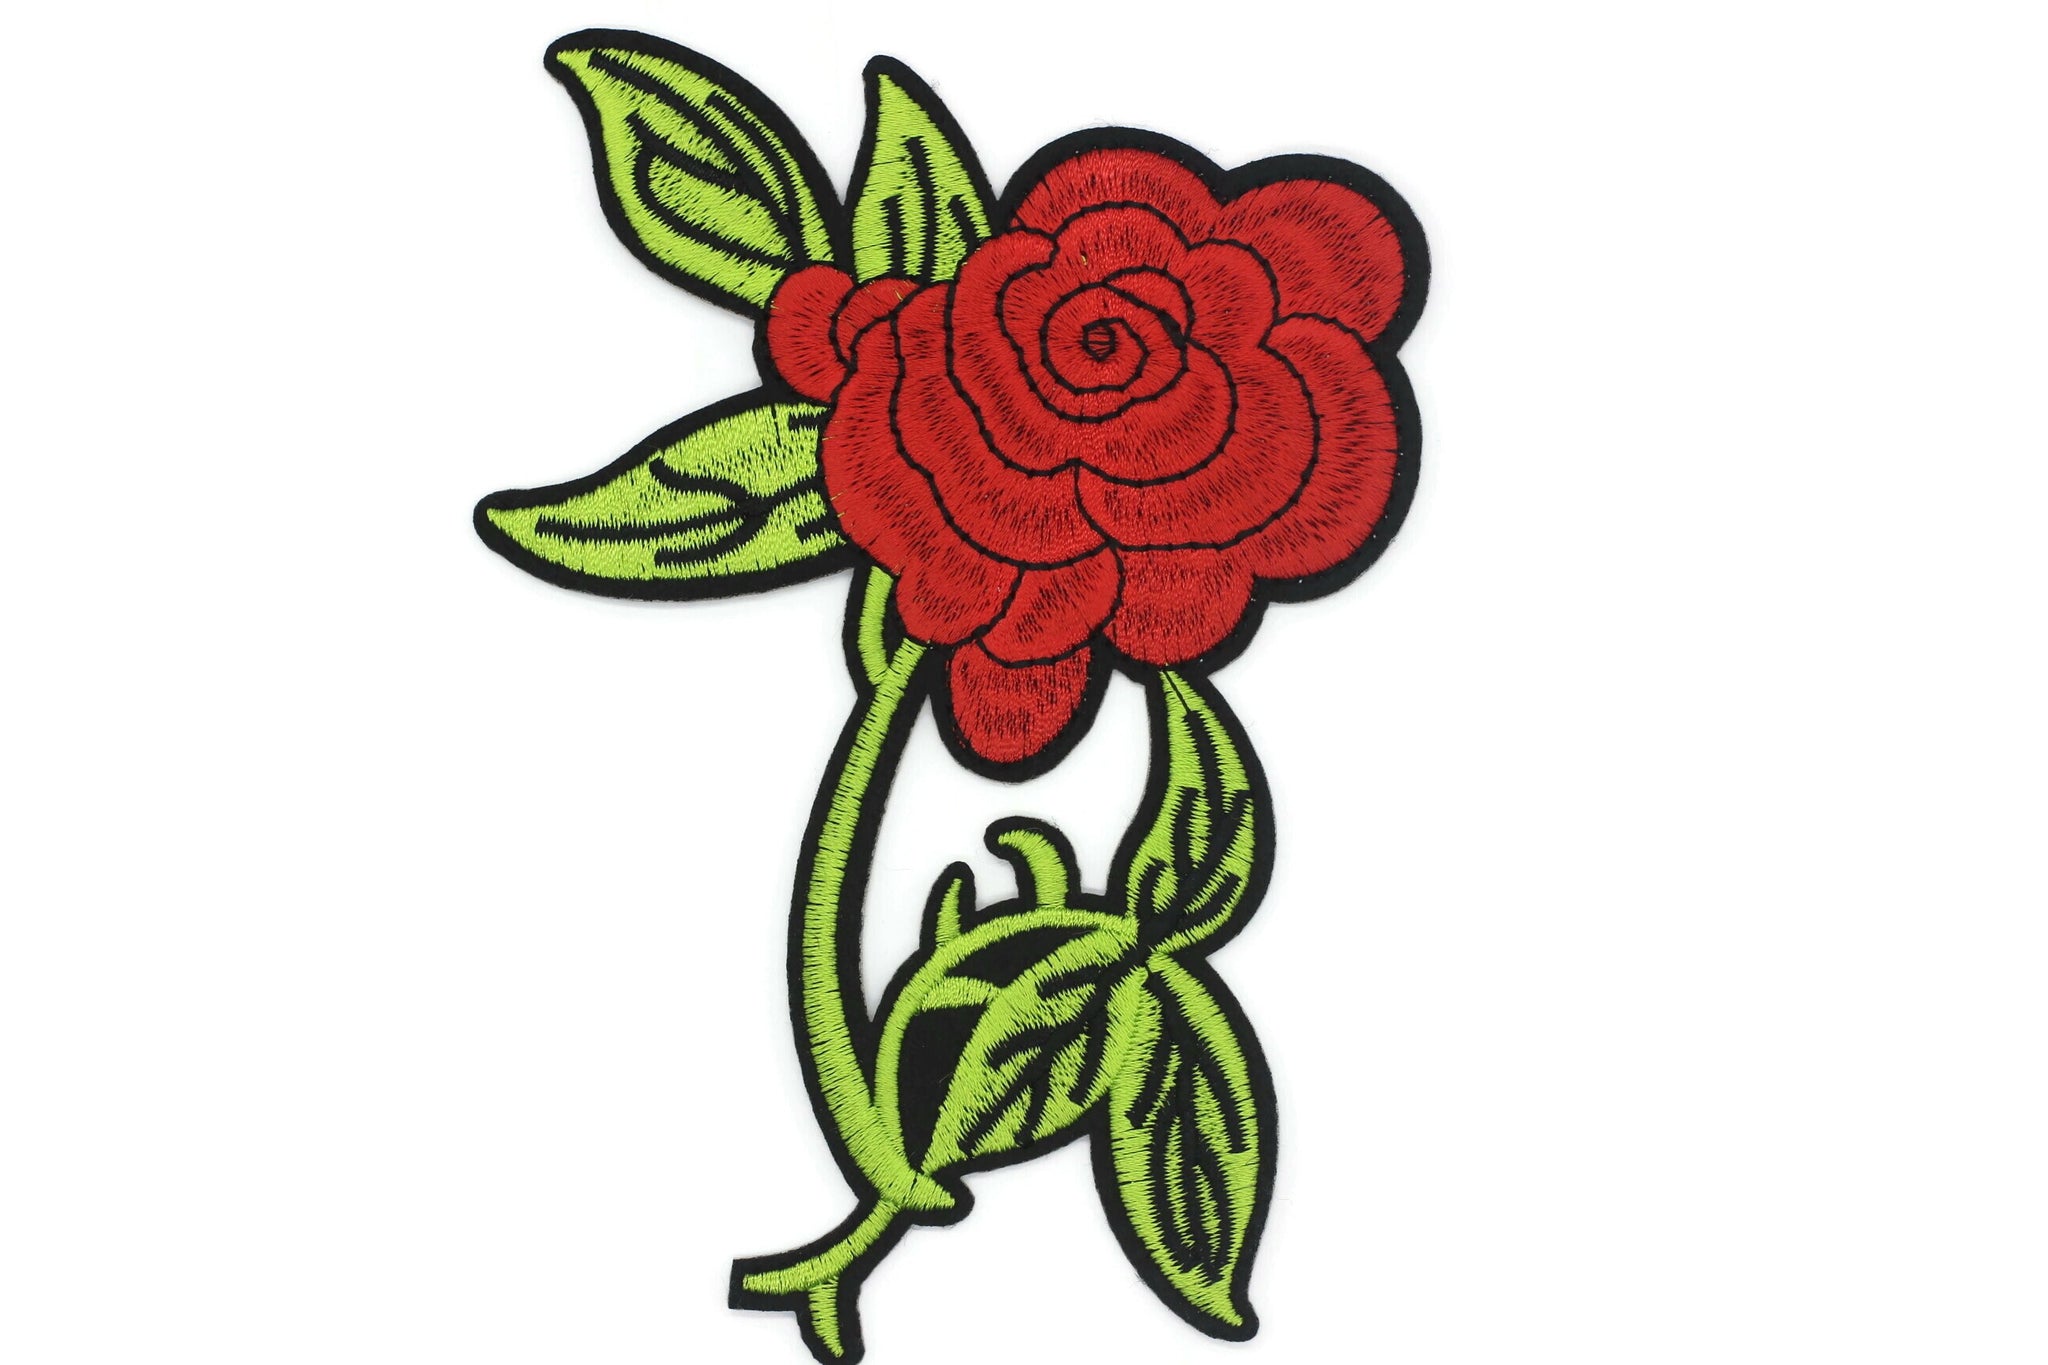 10 Pcs Rose Patch 5.4x3.6 Inch Iron On Patch Embroidery, Custom Patch, High Quality Sew On Badge for Denim, Sew On Patch, Applique